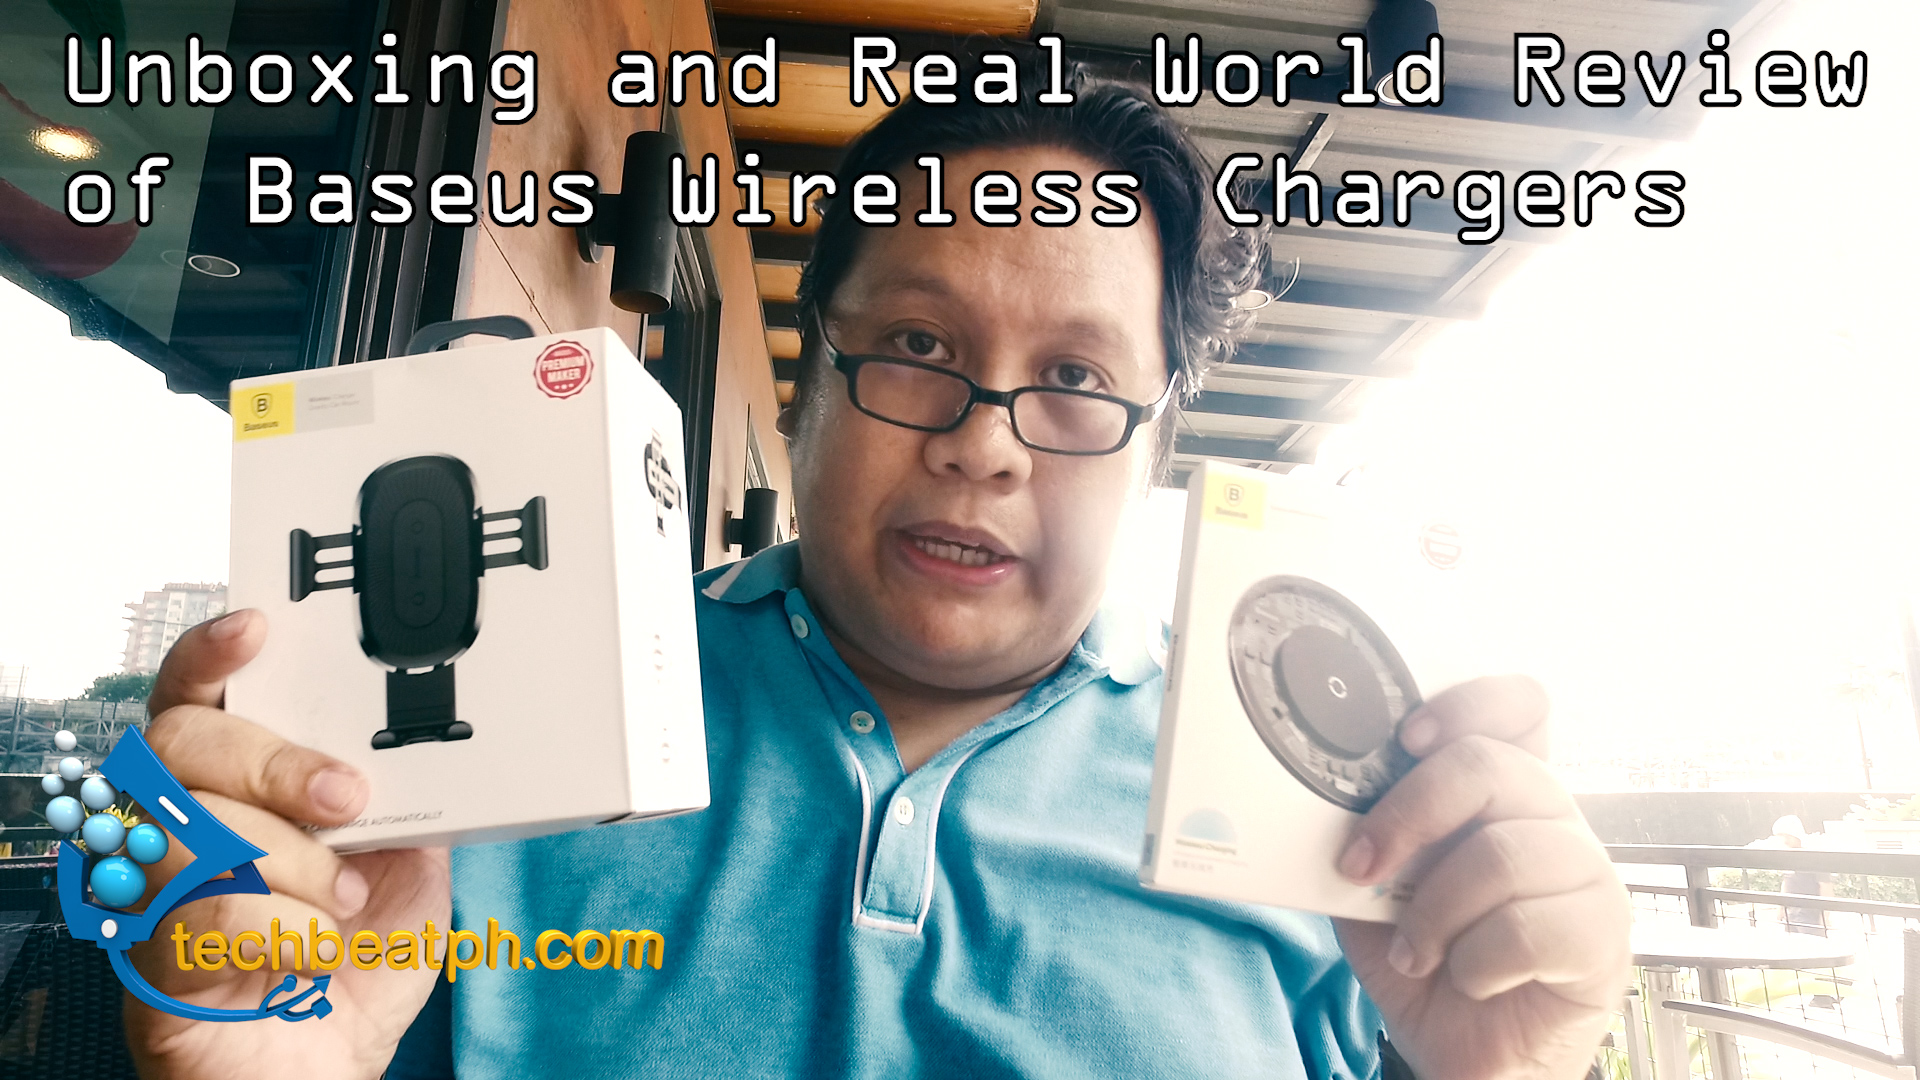 Baseus Wireless Chargers Unboxing and Real World Review